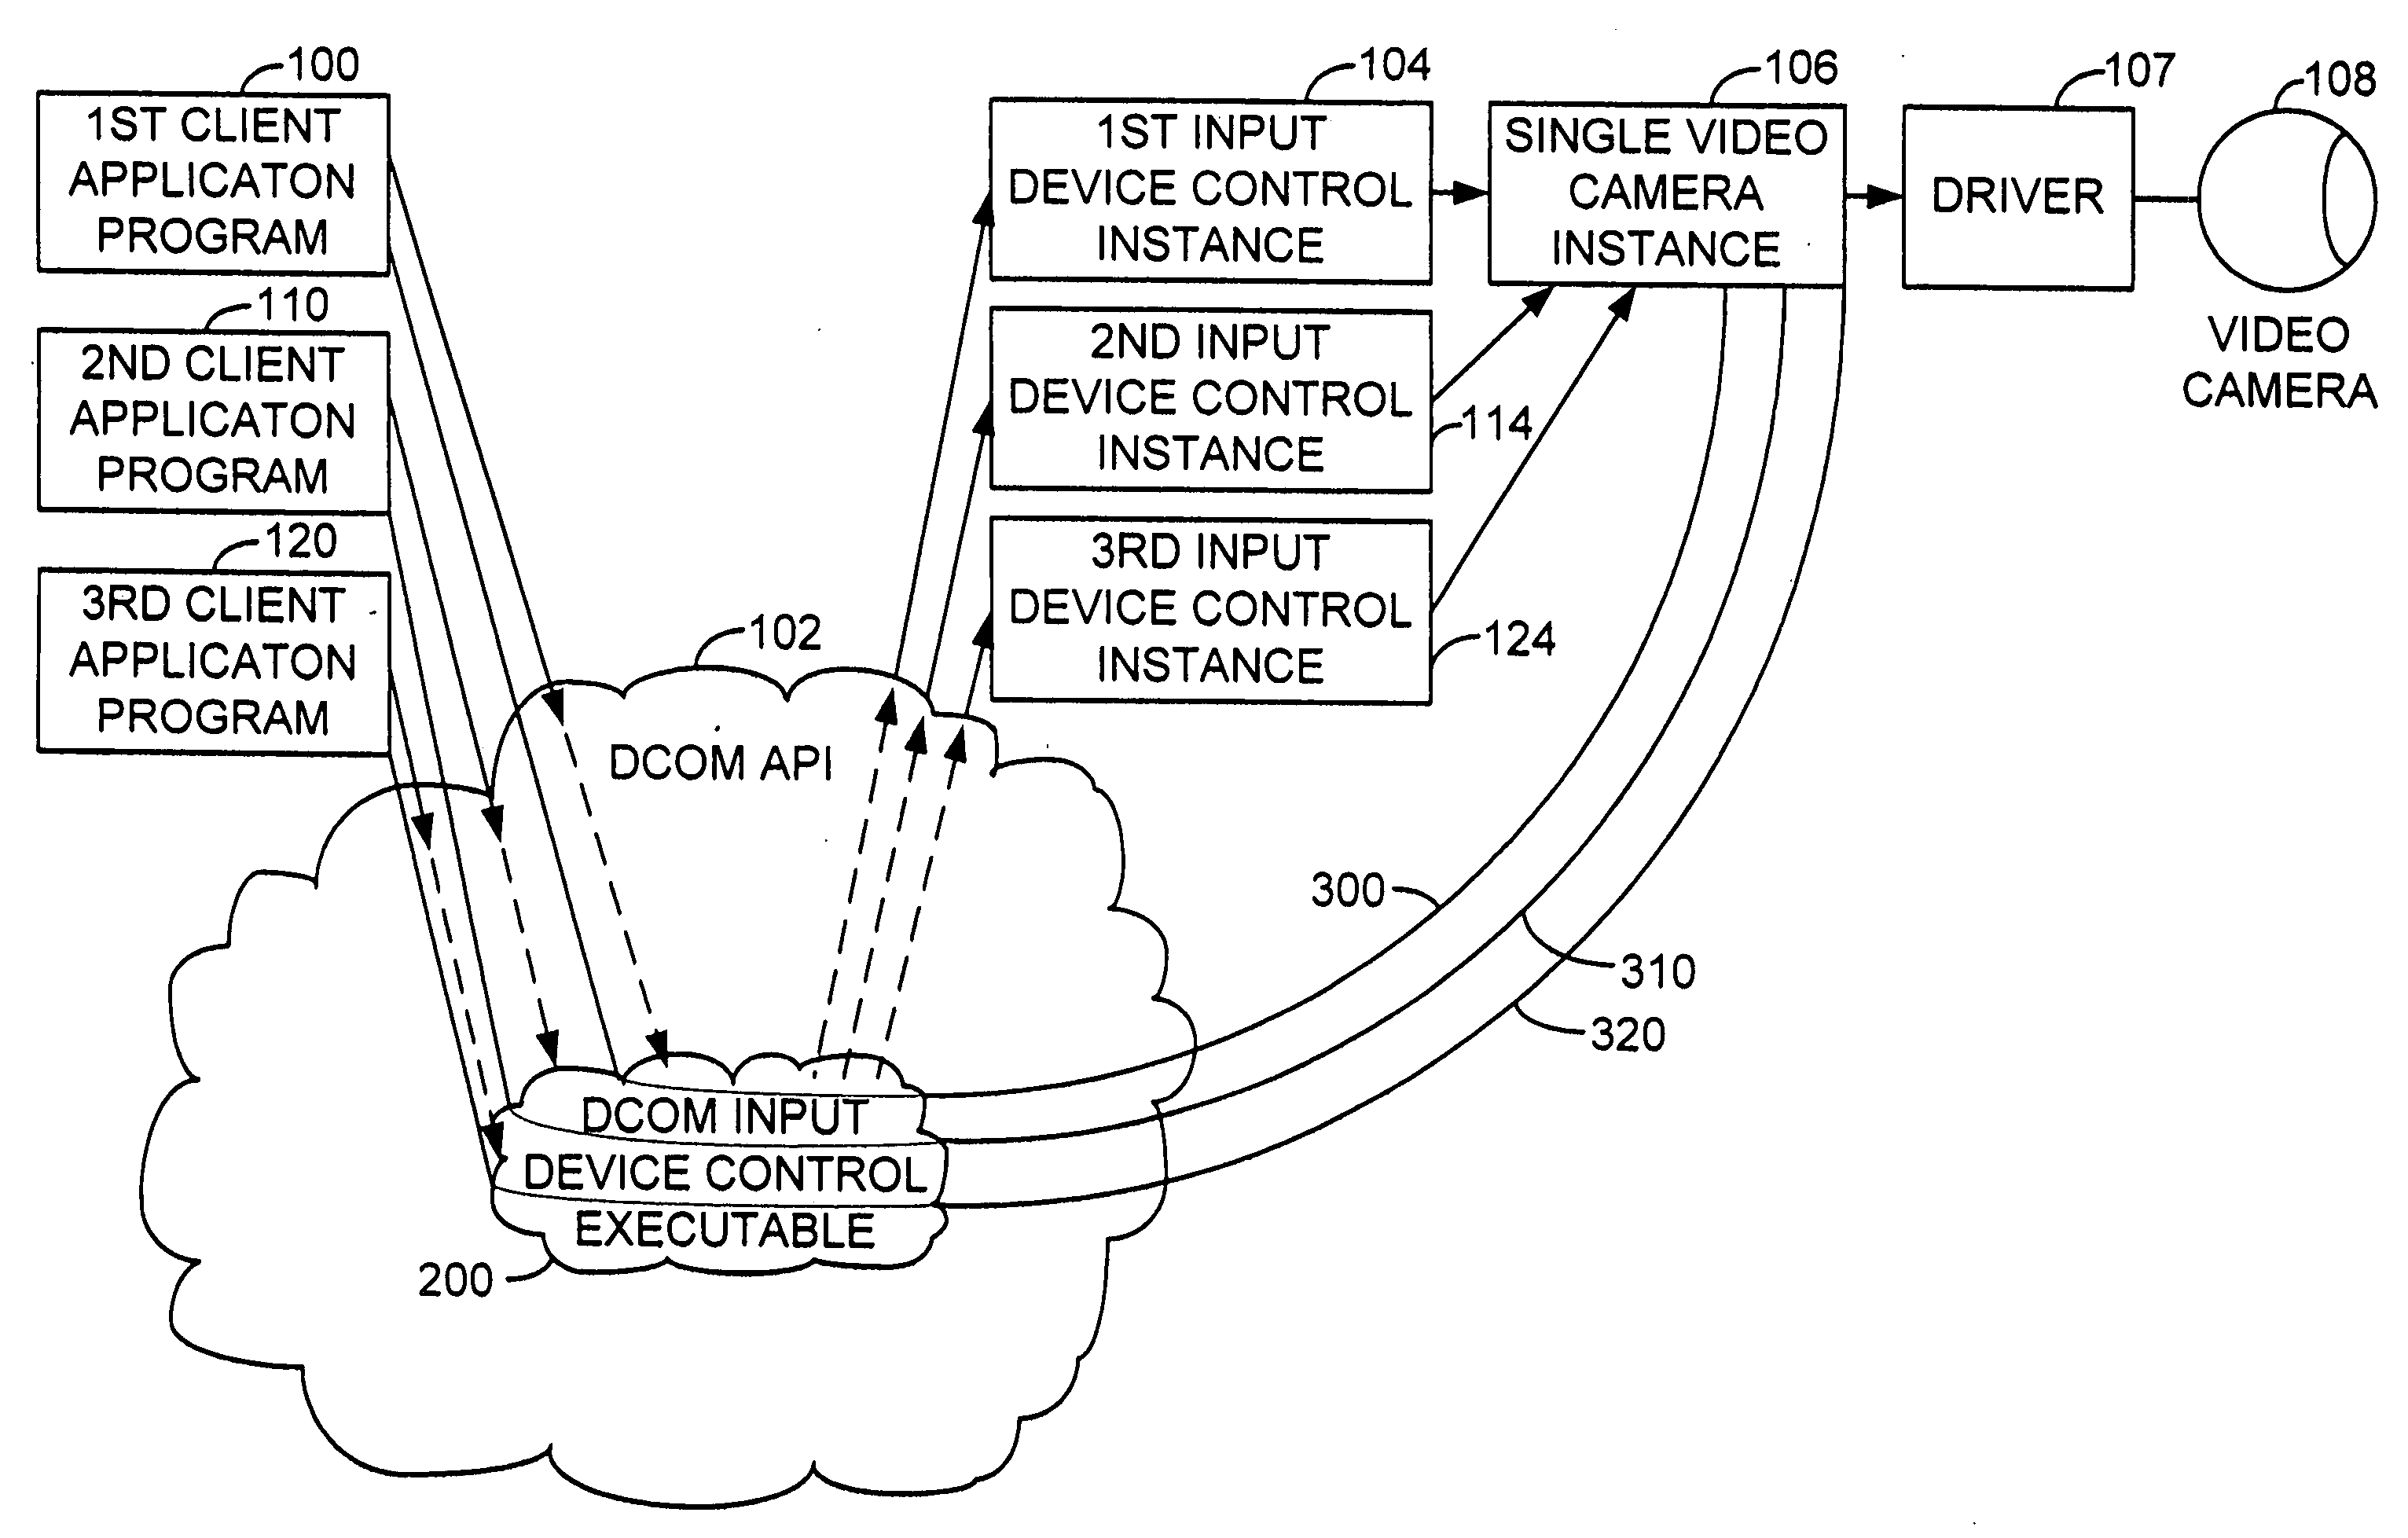 Method and system for providing multi-media data from various sources to various client applications